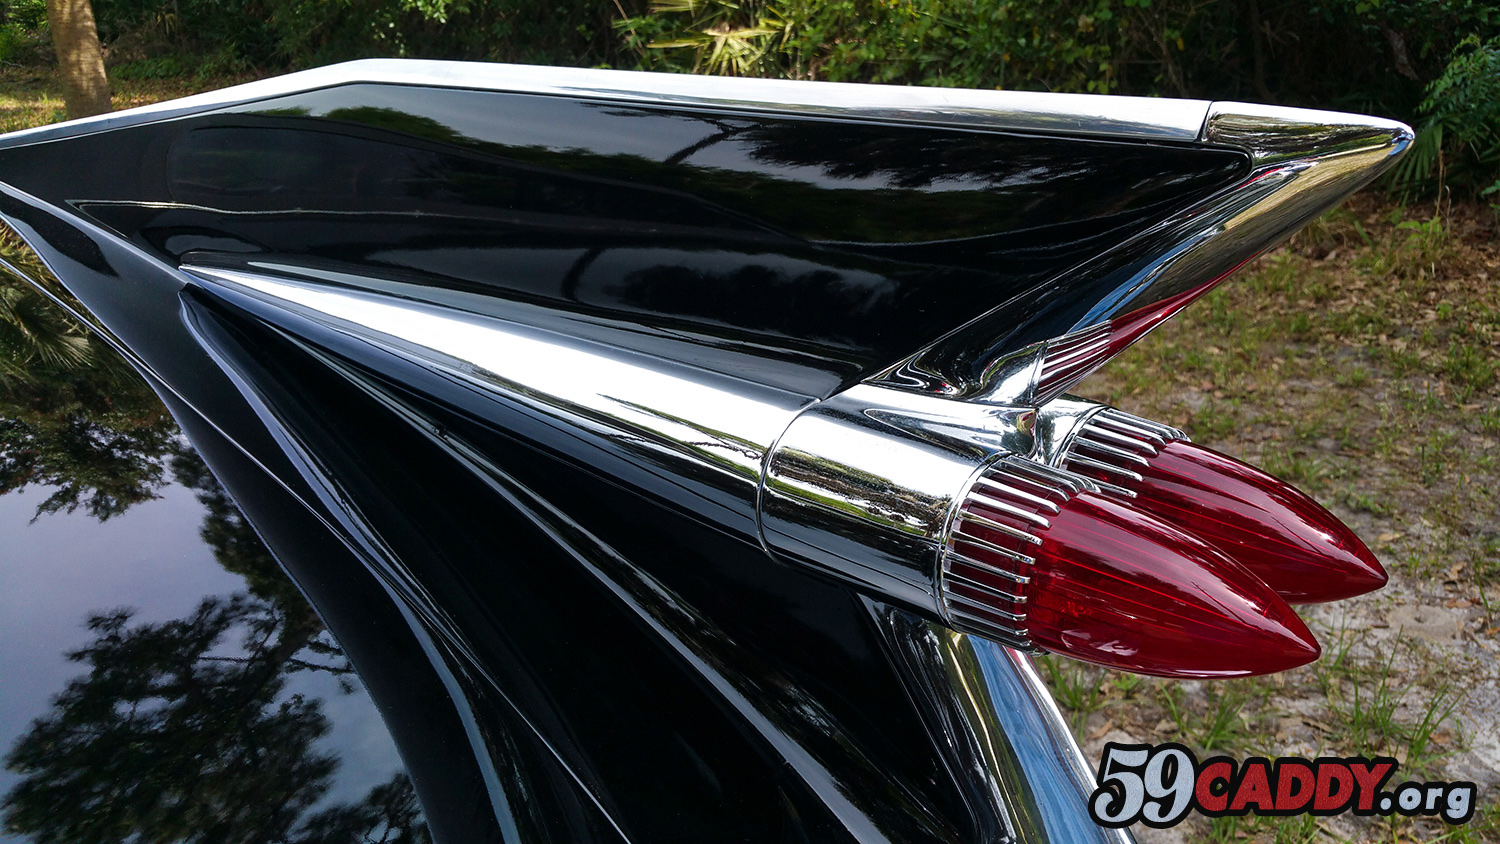 1959 Cadillac For Sale Black 1959 Cadillac Convertible Series 62 For Sale